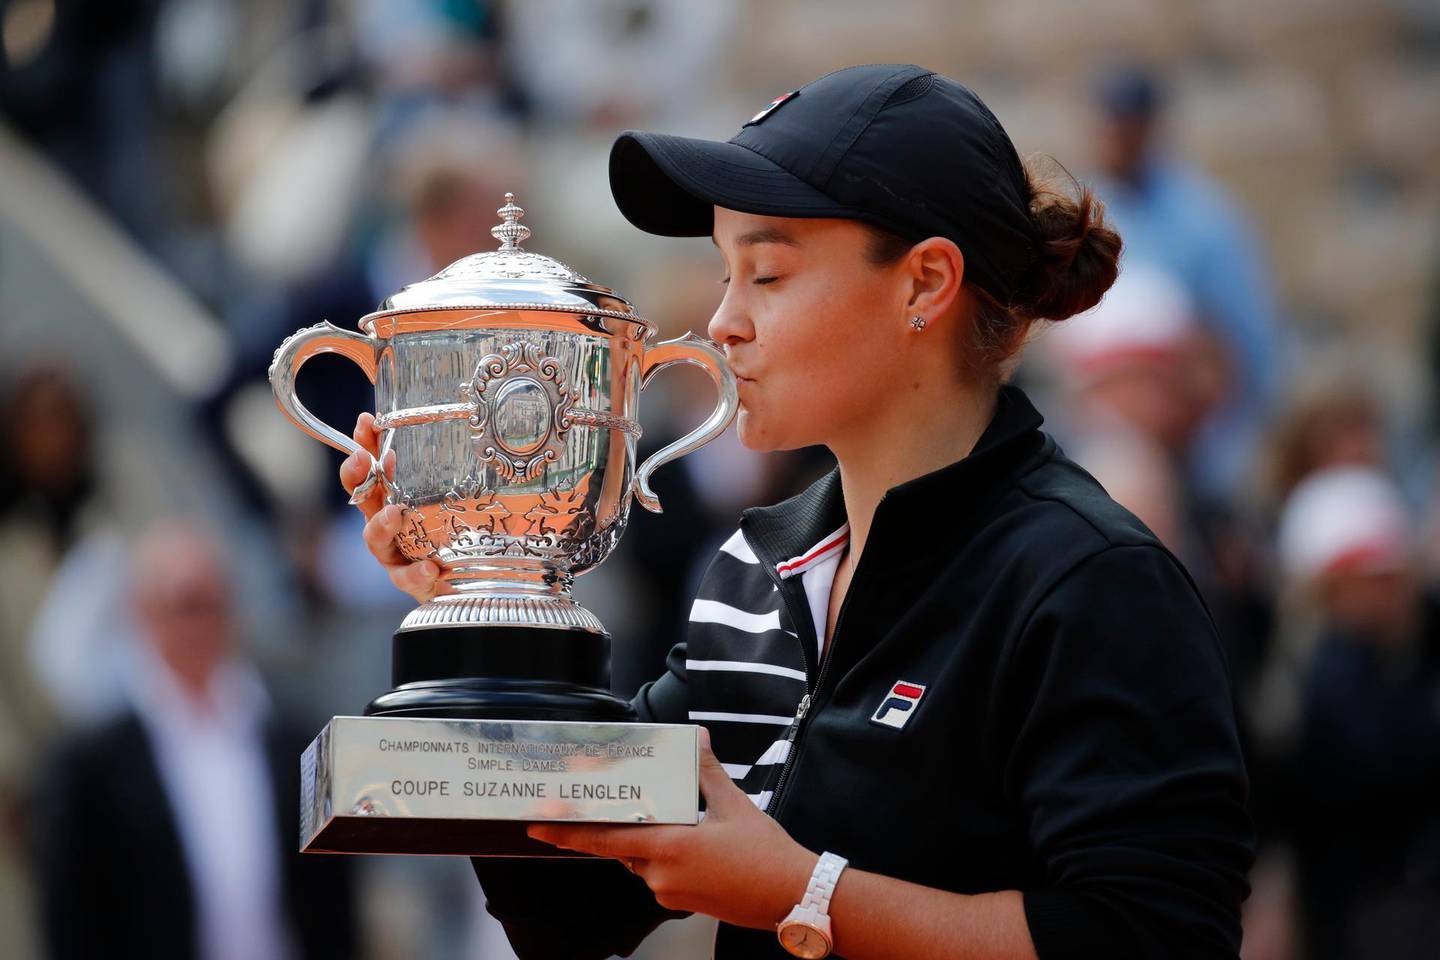 Australia's Ashleigh Barty kisses the trophy as she celebrates winning her women's final match of the French Open tennis tournament against Marketa Vondrousova of the Czech Republic in two sets 6-1, 6-3, at the Roland Garros stadium in Paris, Saturday, June 8, 2019. (AP Photo/Christophe Ena)